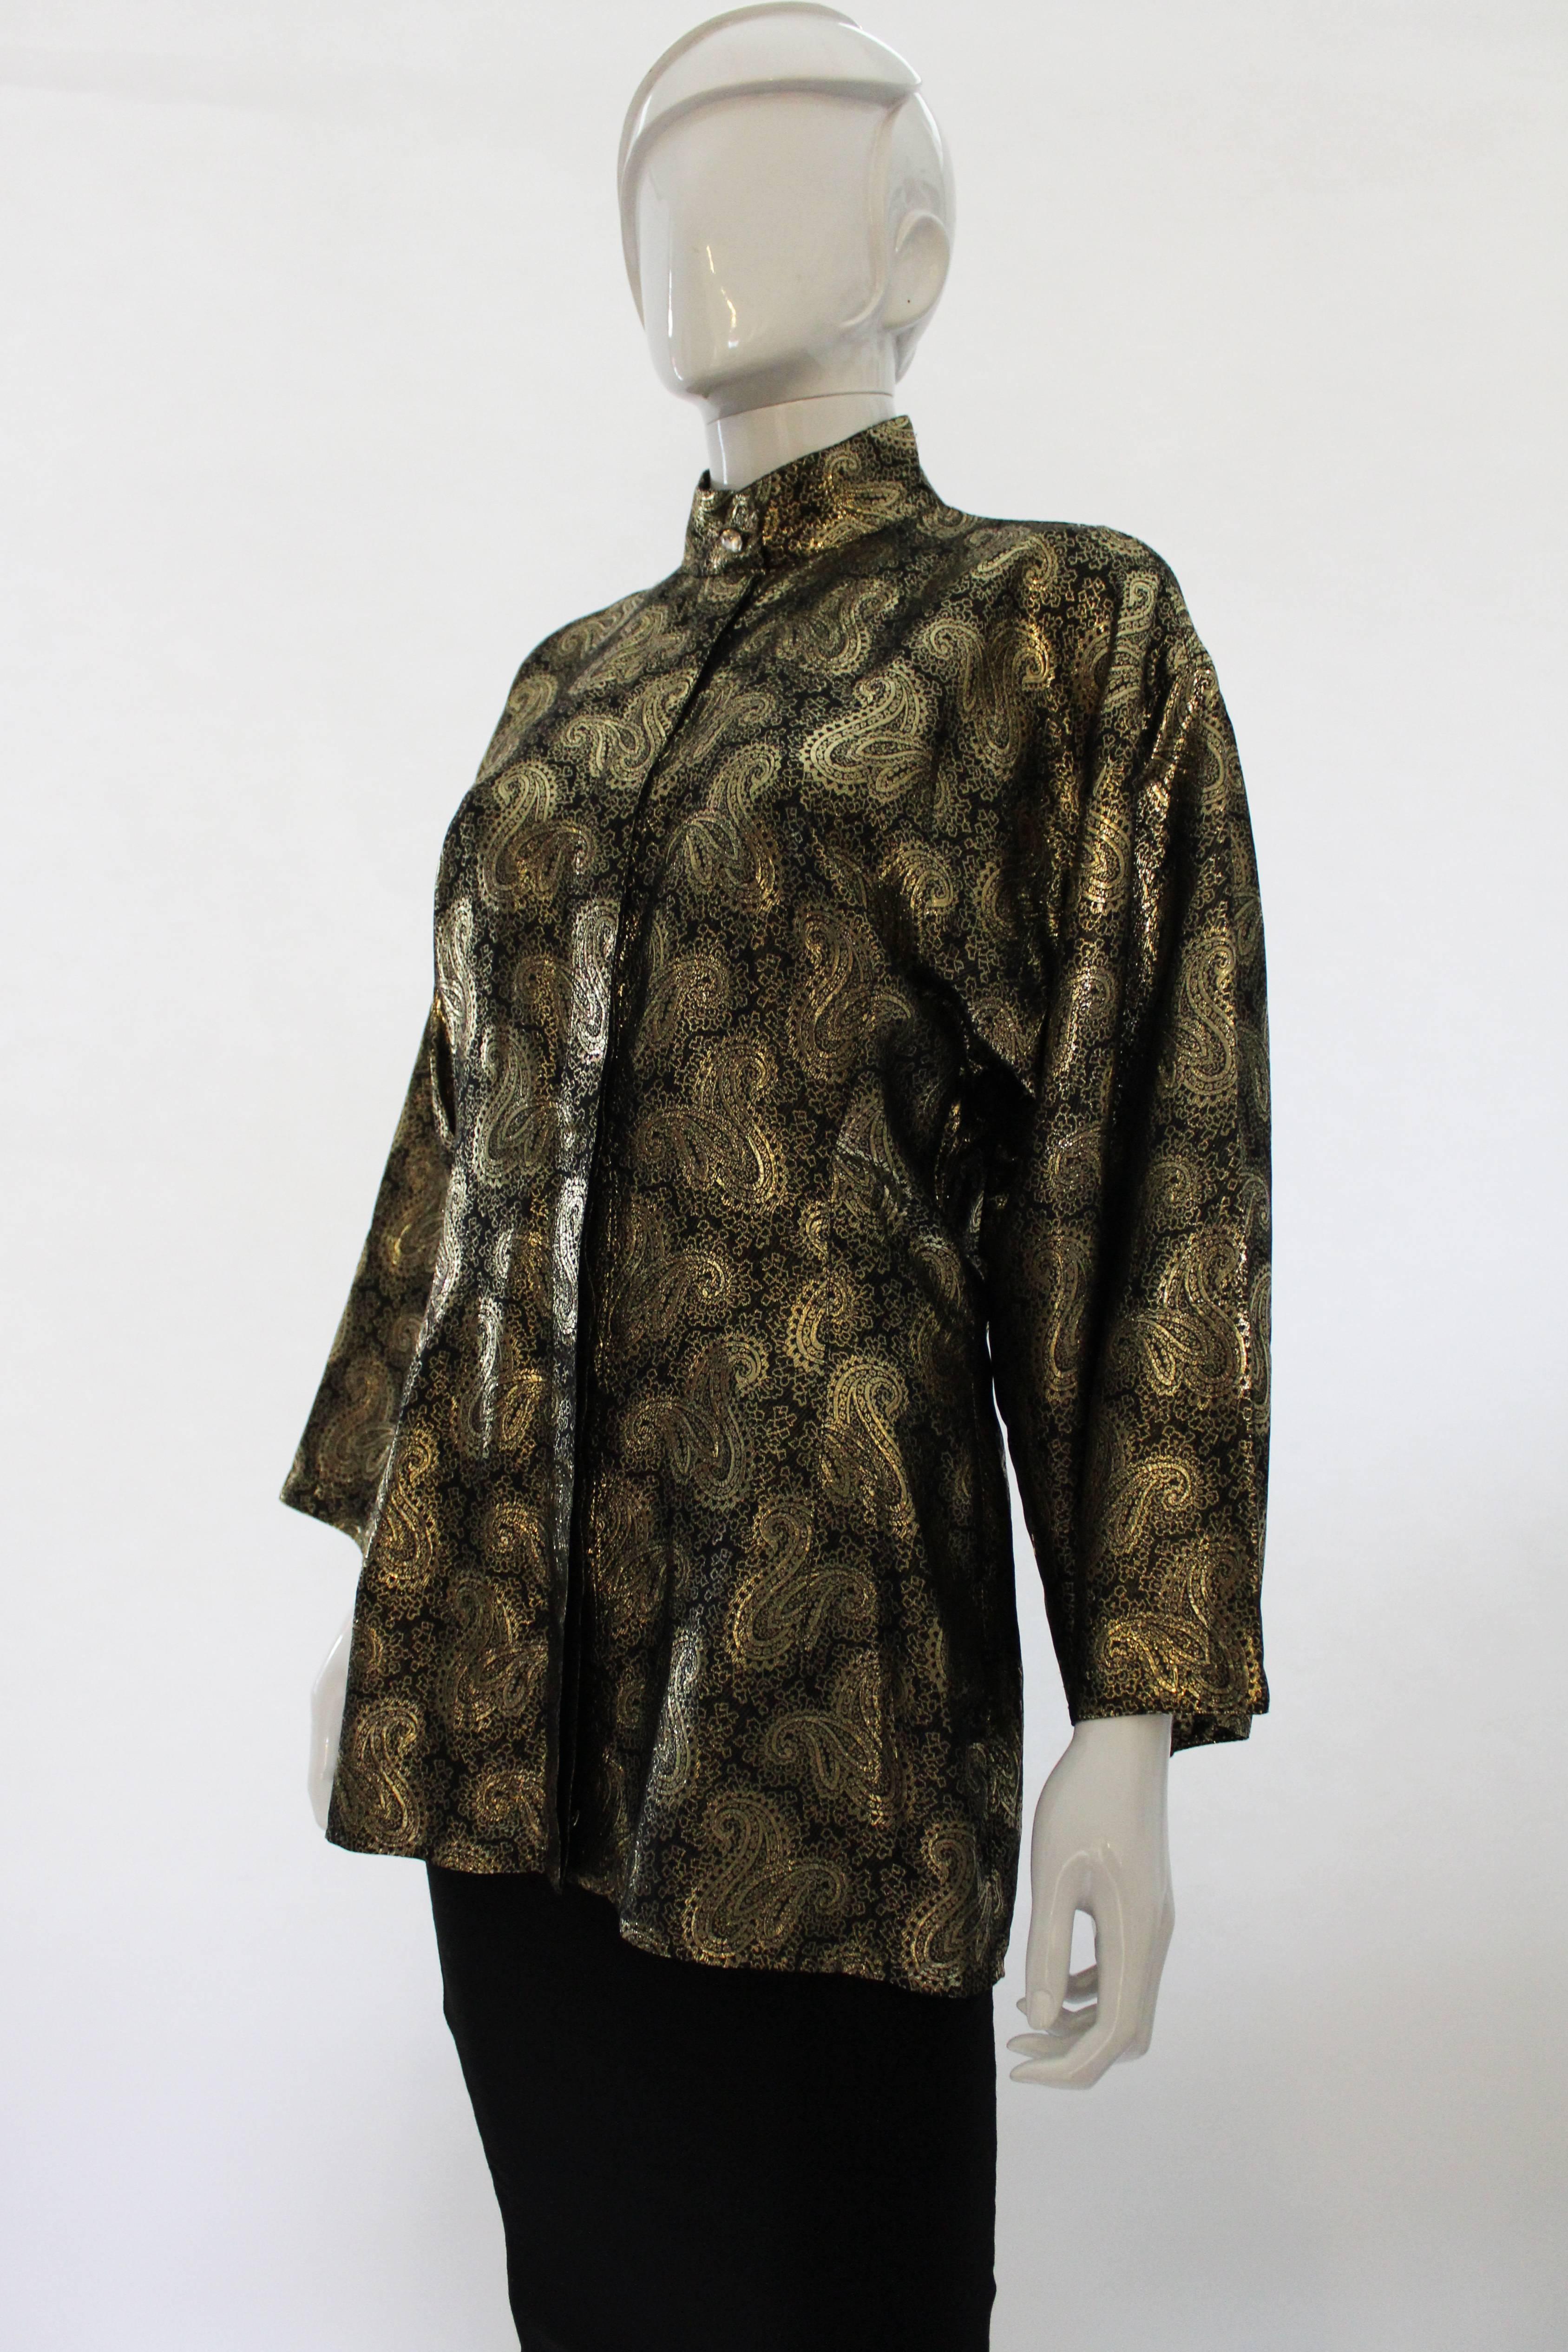 A glorious and glamorous evening jacket bythe late Gianni Versace. Made of a wonderful lame fabric, it has a black background, with a gold paisley design. The jacket/ shirt has a mandarin style collar ,one hidden row of buttons, and one decorative